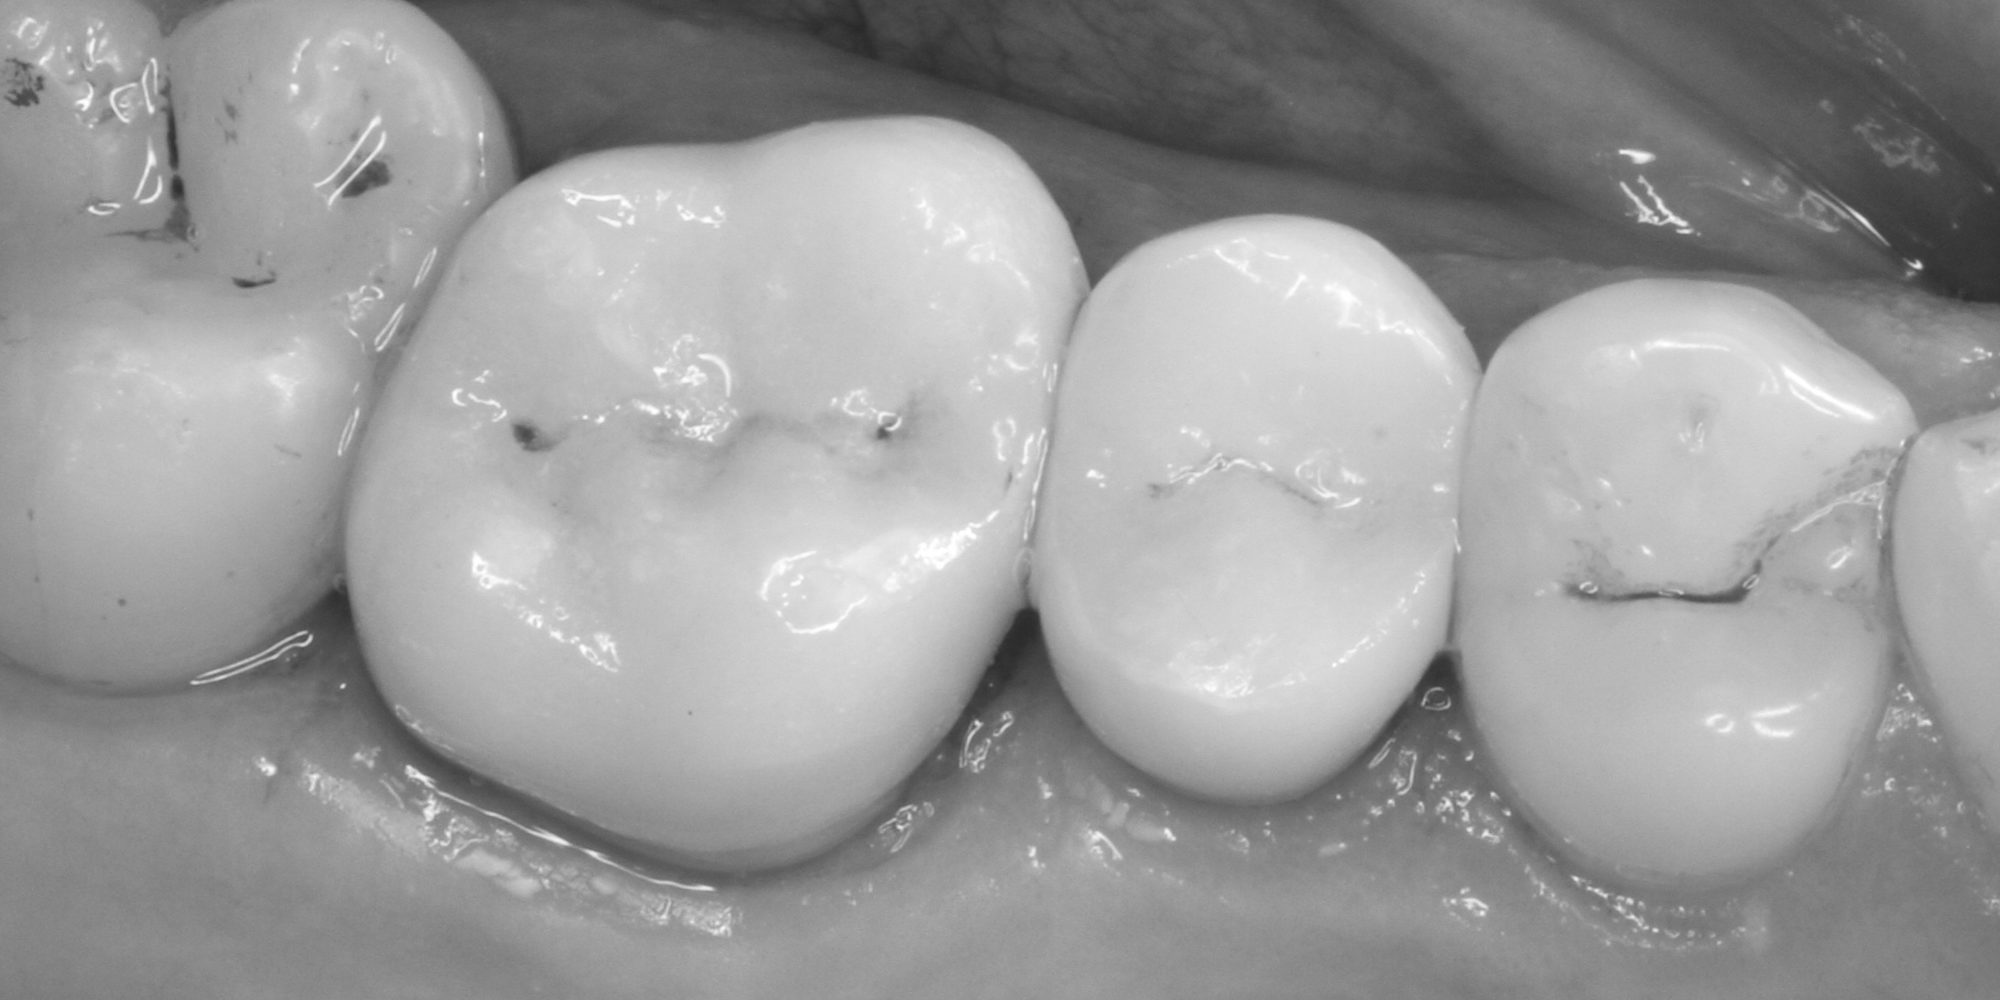 Can you spot the two ceramic crowns?